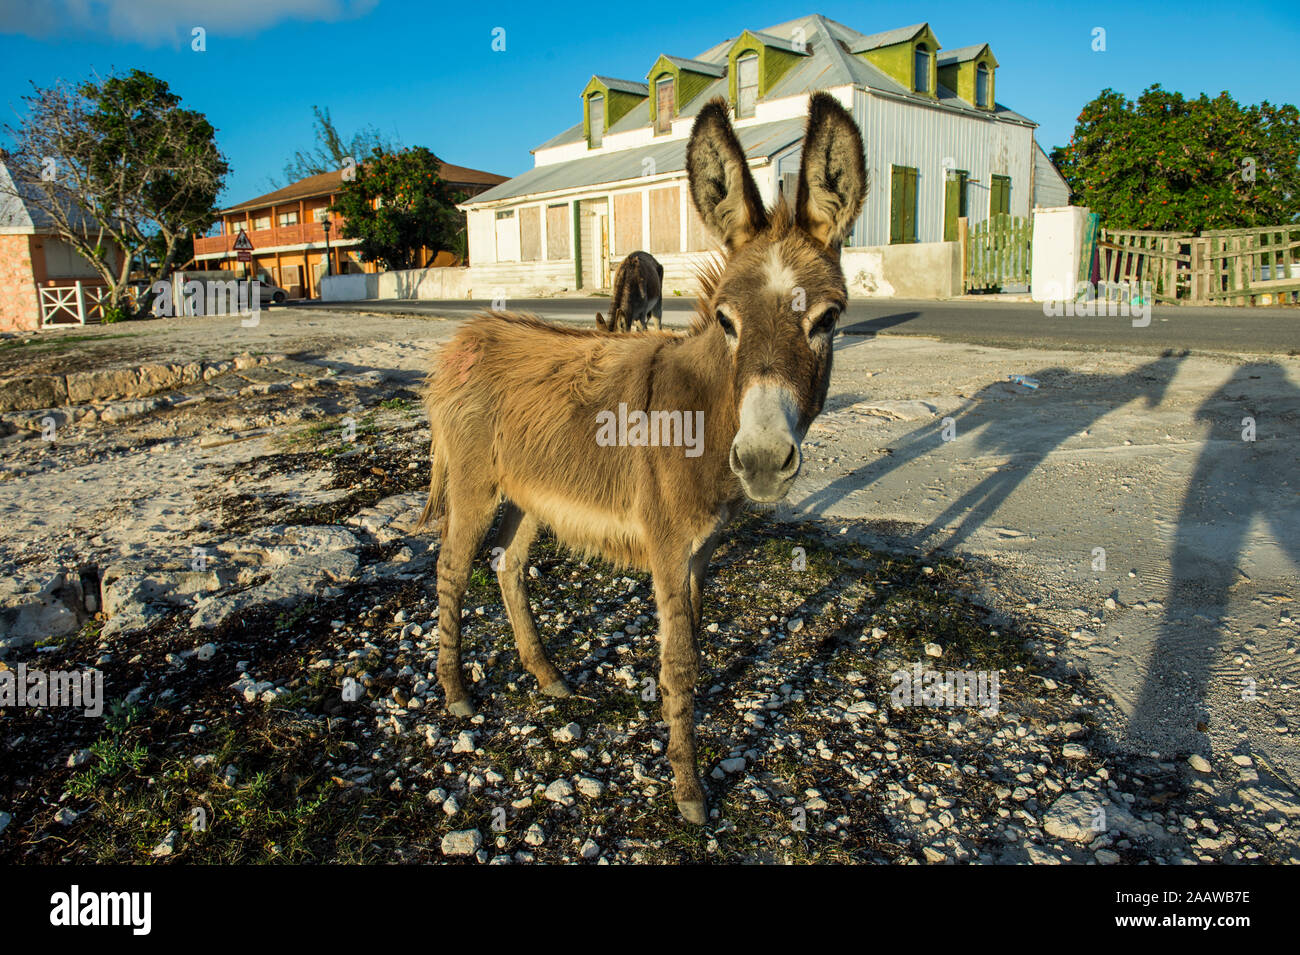 Portrait of wild donkey standing on land against house at Cockburn town, Grand Turk Stock Photo